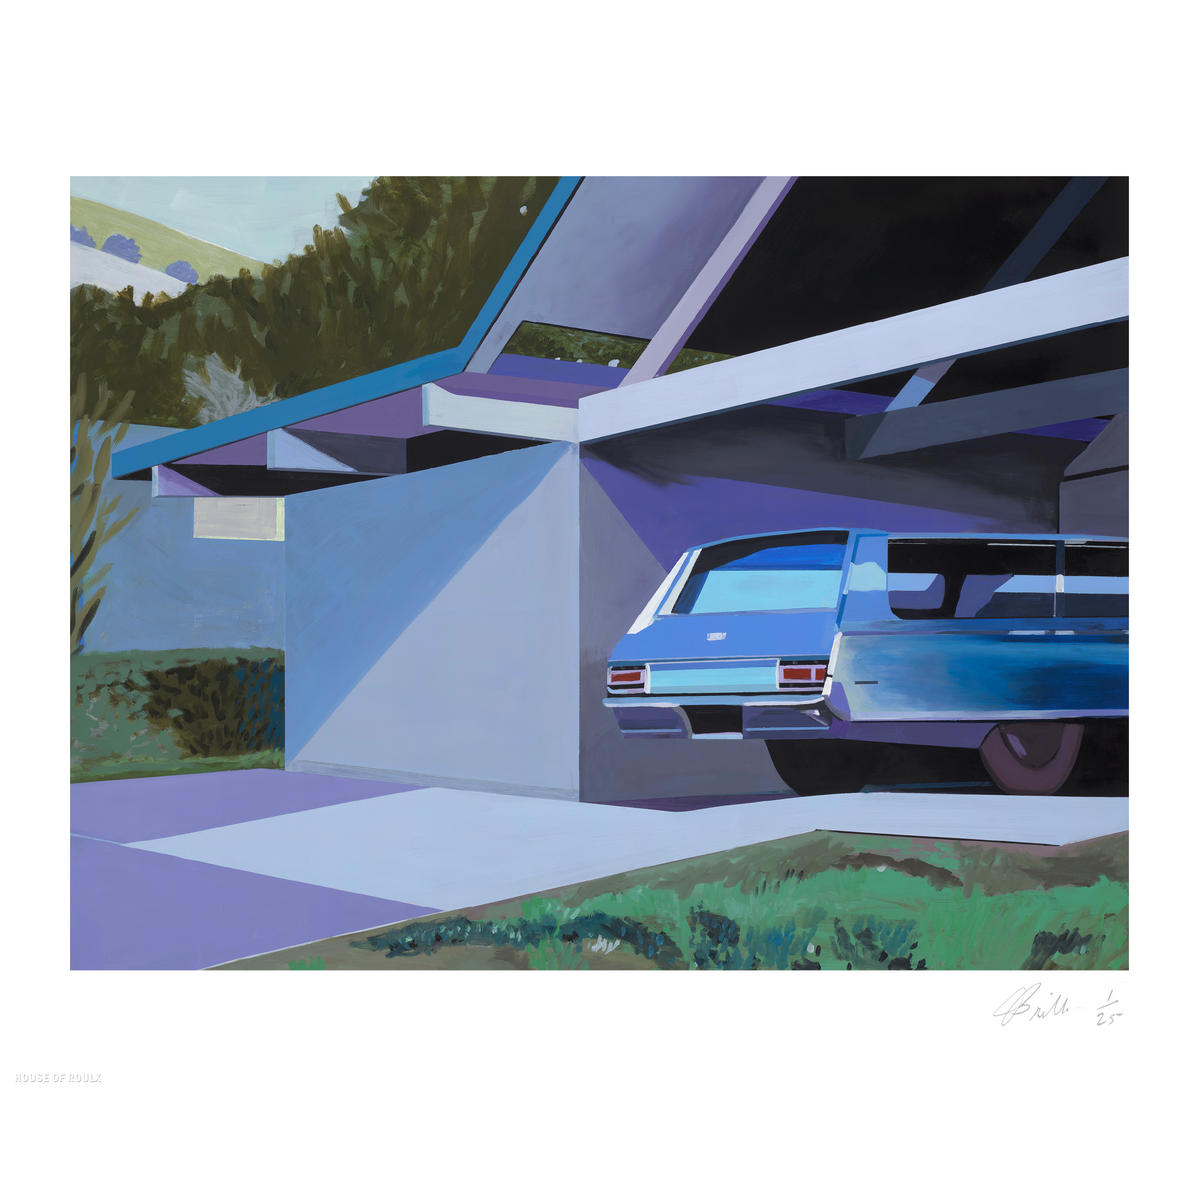 Jessica Brilli &quot;Chrysler in Carport&quot; - Archival Print, Limited Edition of 25 - 14 x 17&quot;